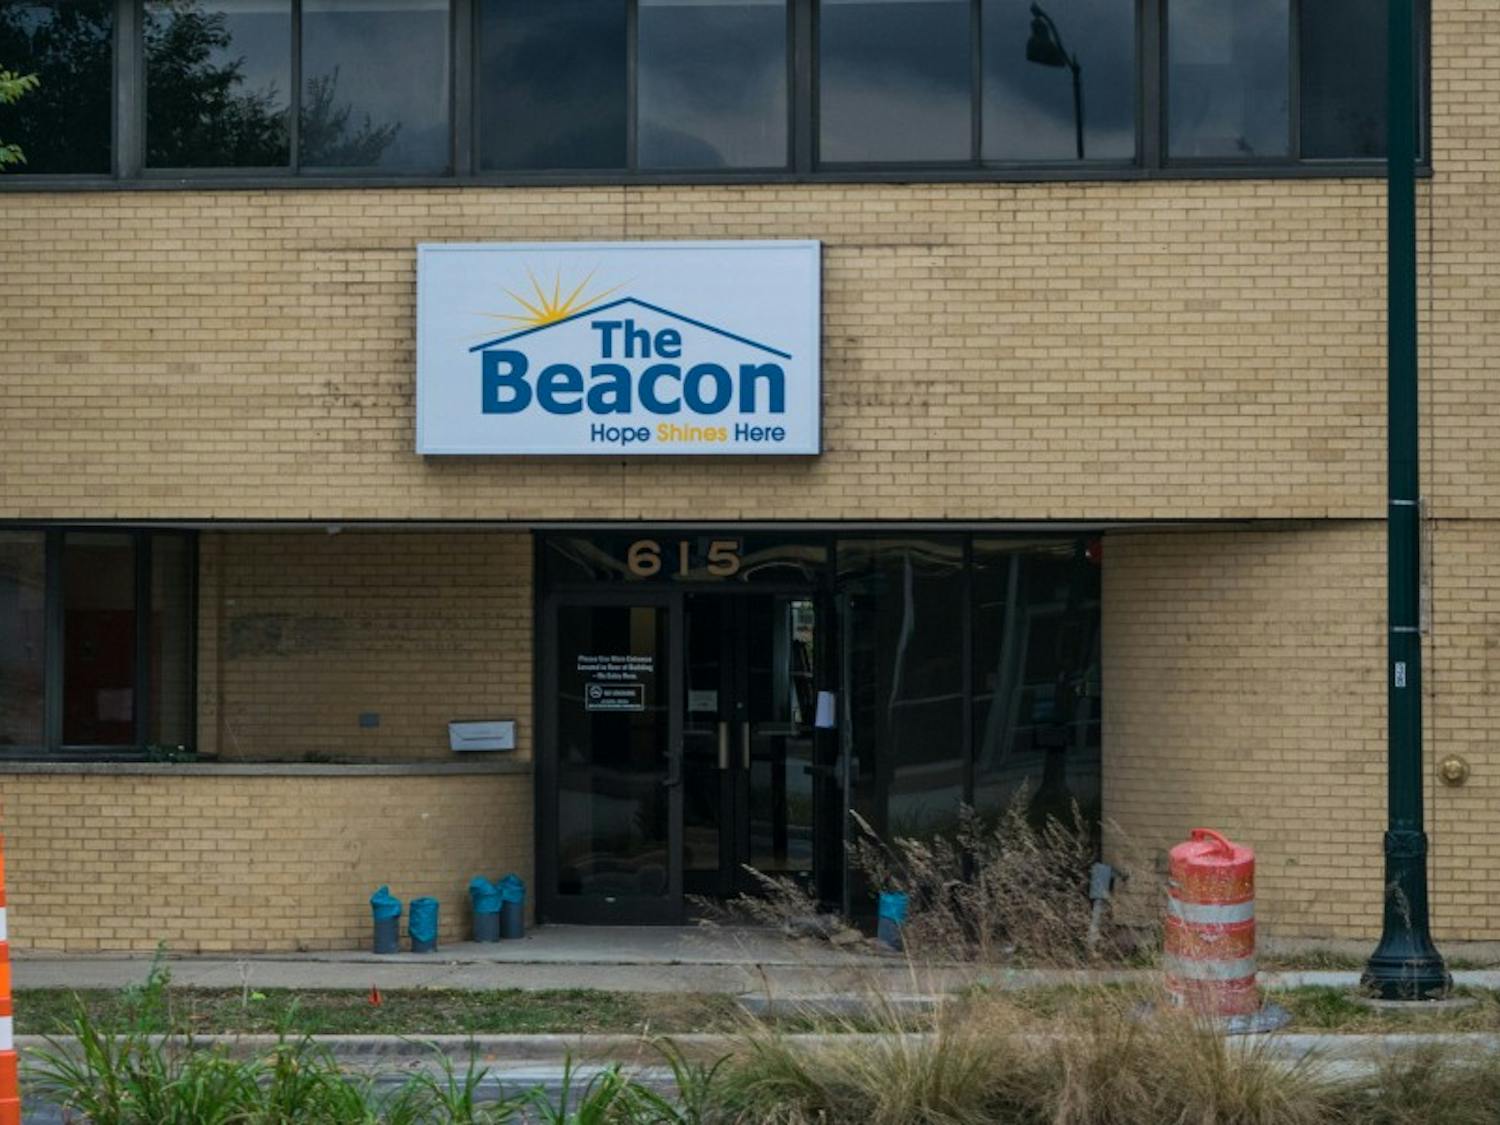 The Beacon, a resource center for homeless individuals, opened last month in downtown Madison.